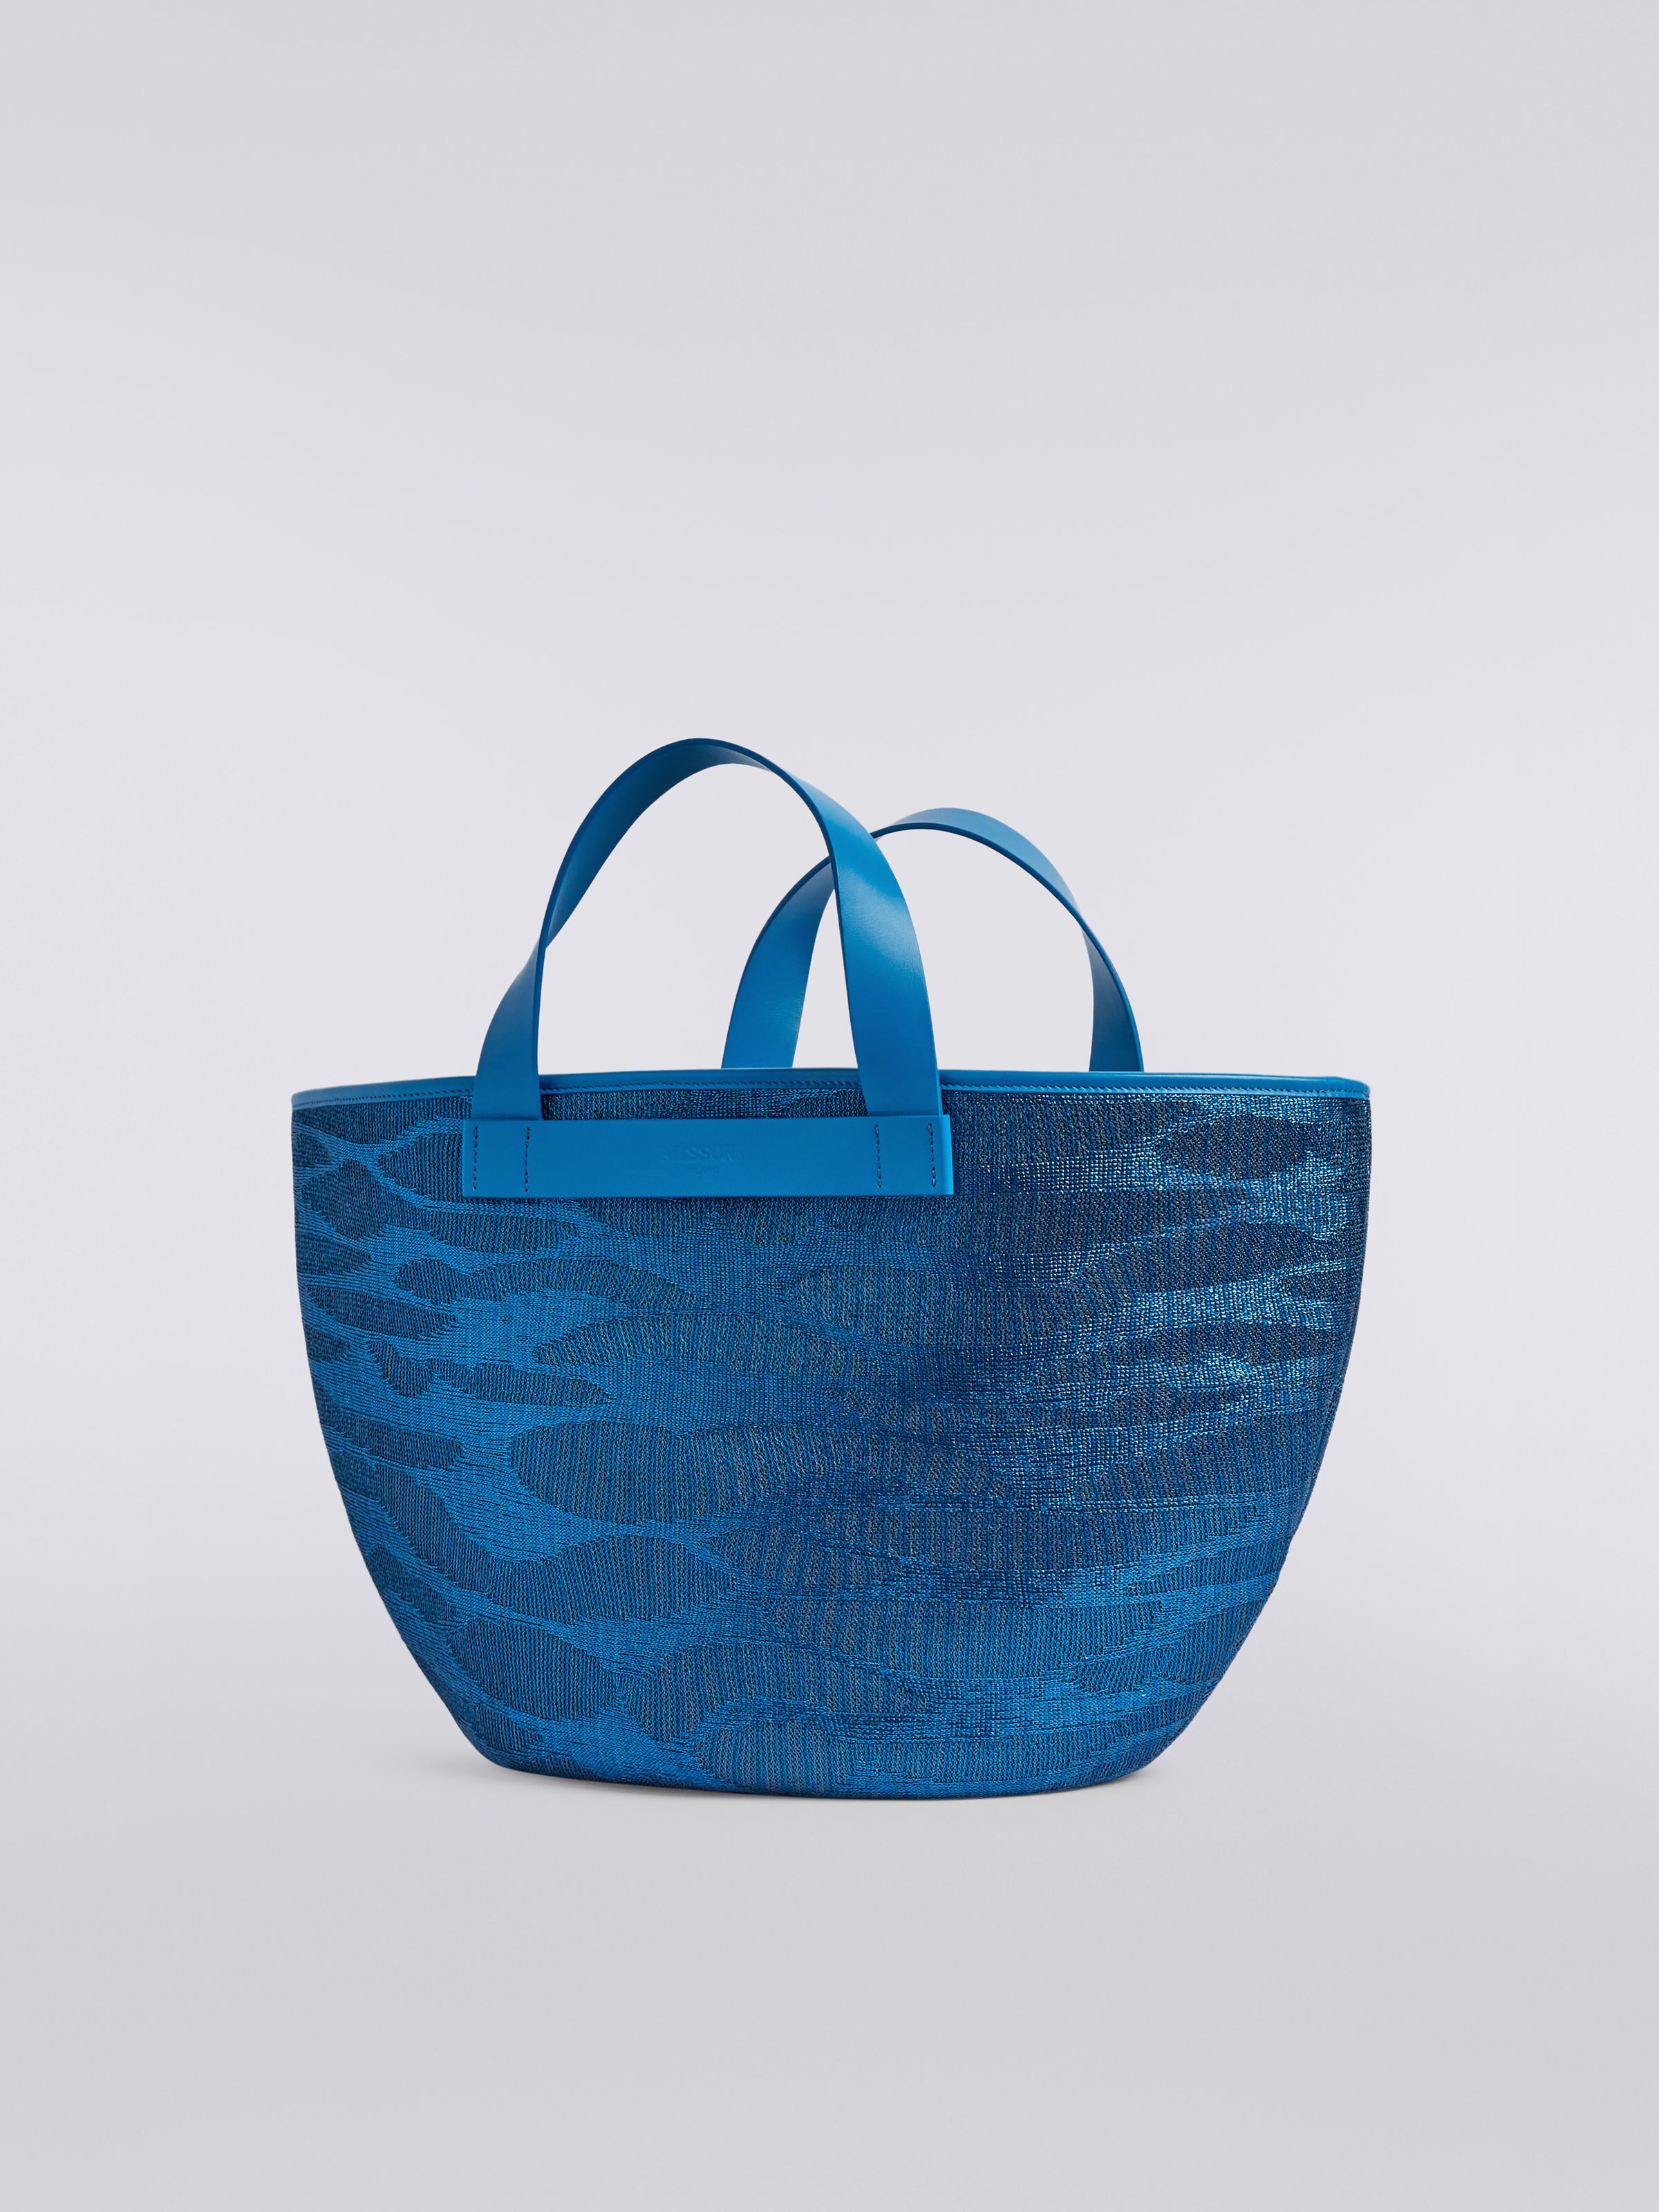 Jacquard viscose knit tote with leather handles, Blue - 1